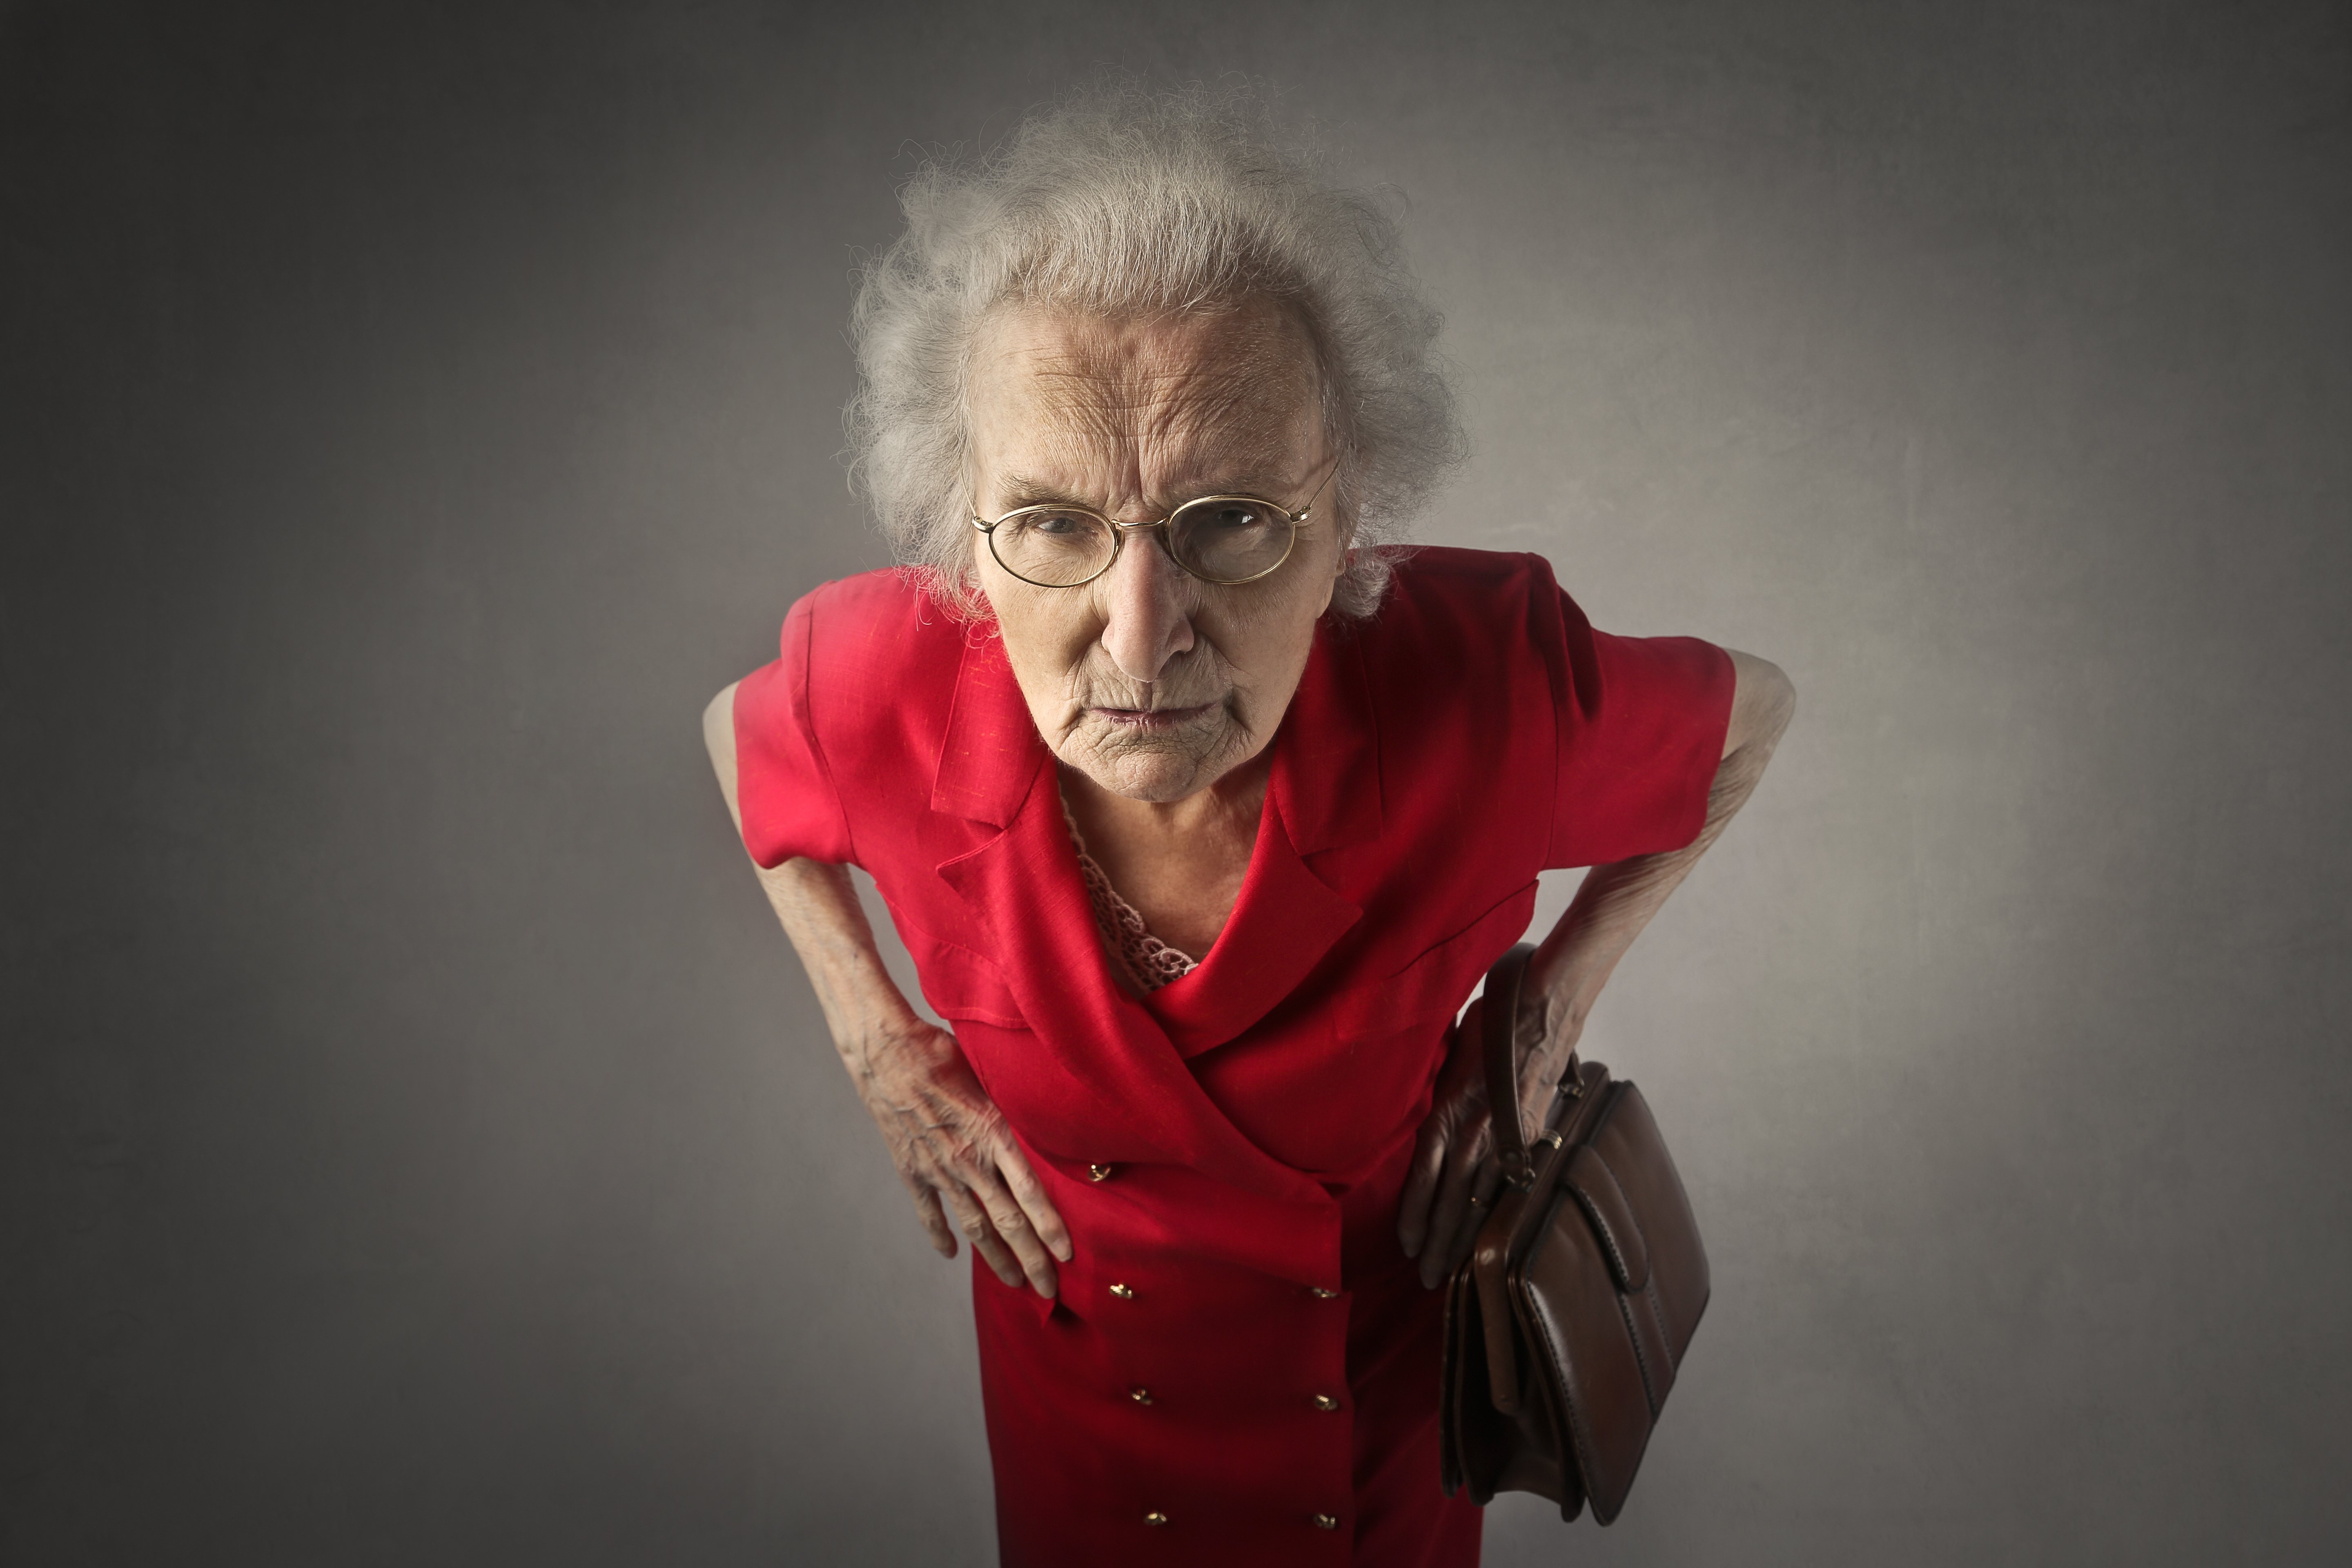 An angry lady dressed in red. | Source: Shutterstock.